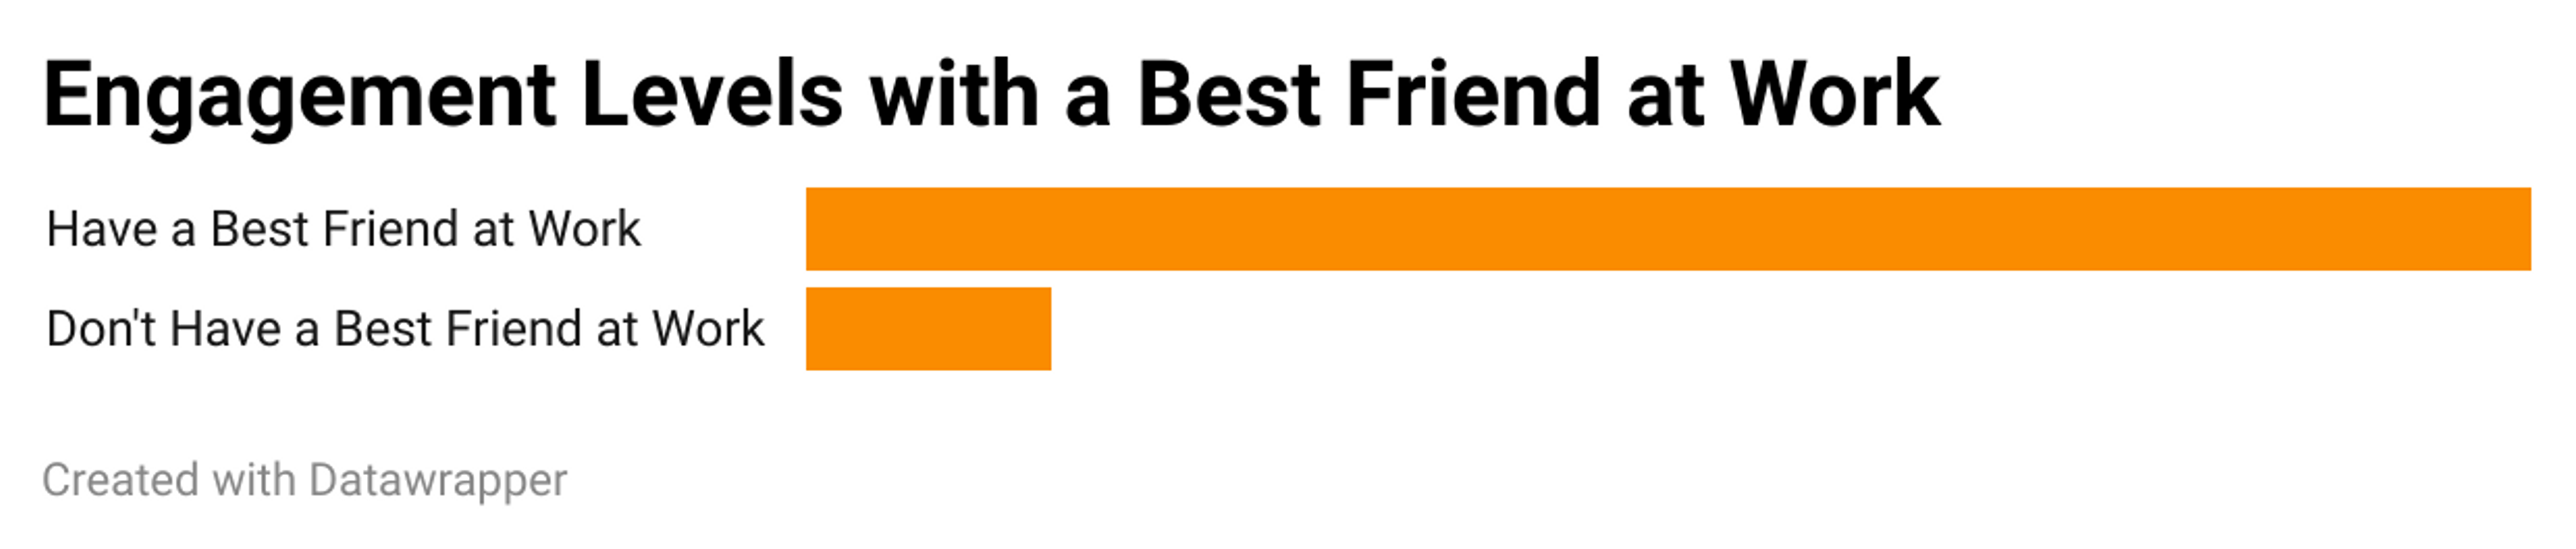 Bar chart that shows having a best friend at work leads to higher engagement levels